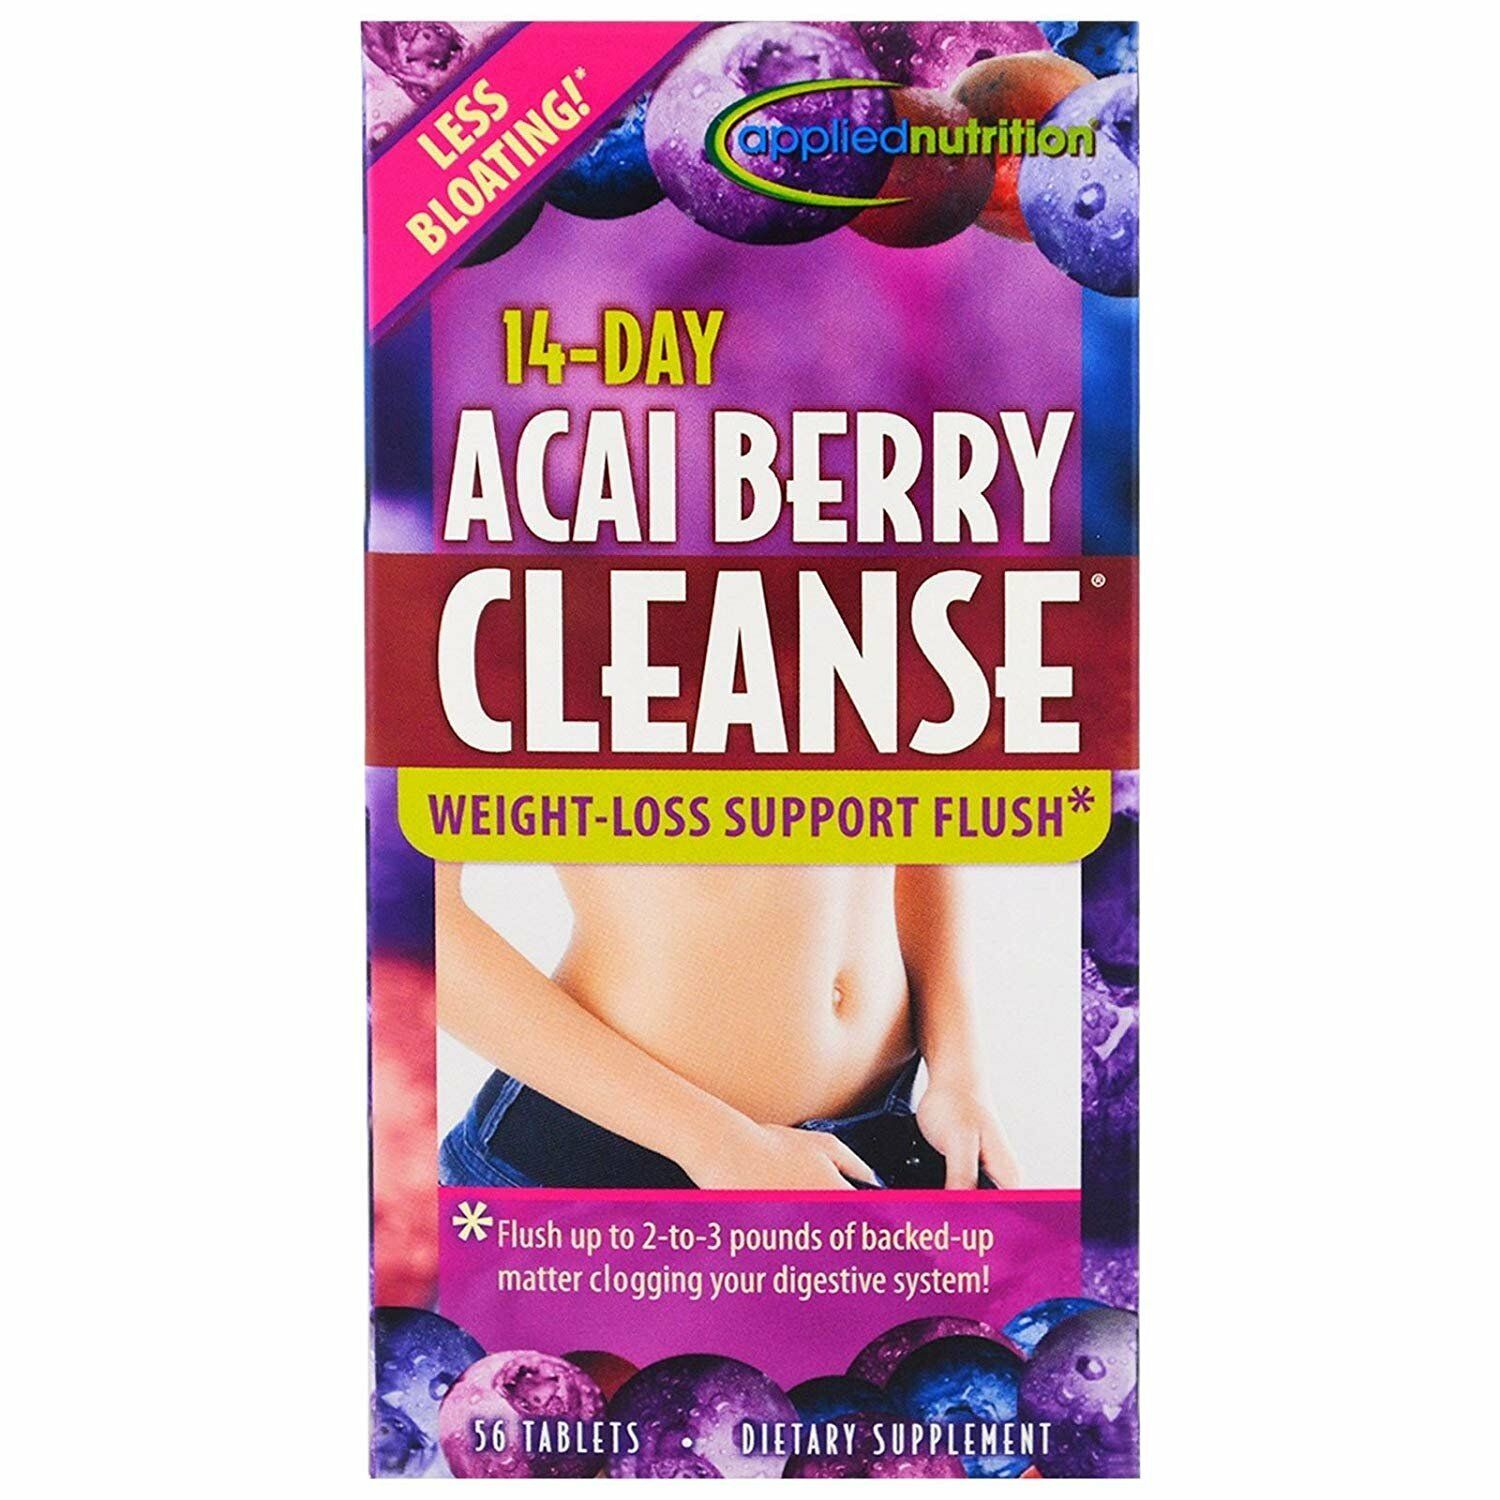 Applied Nutrition Acai Berry Cleanse Weight-Loss Support Flush Supplement Tablet, 56 Ct - image 3 of 7